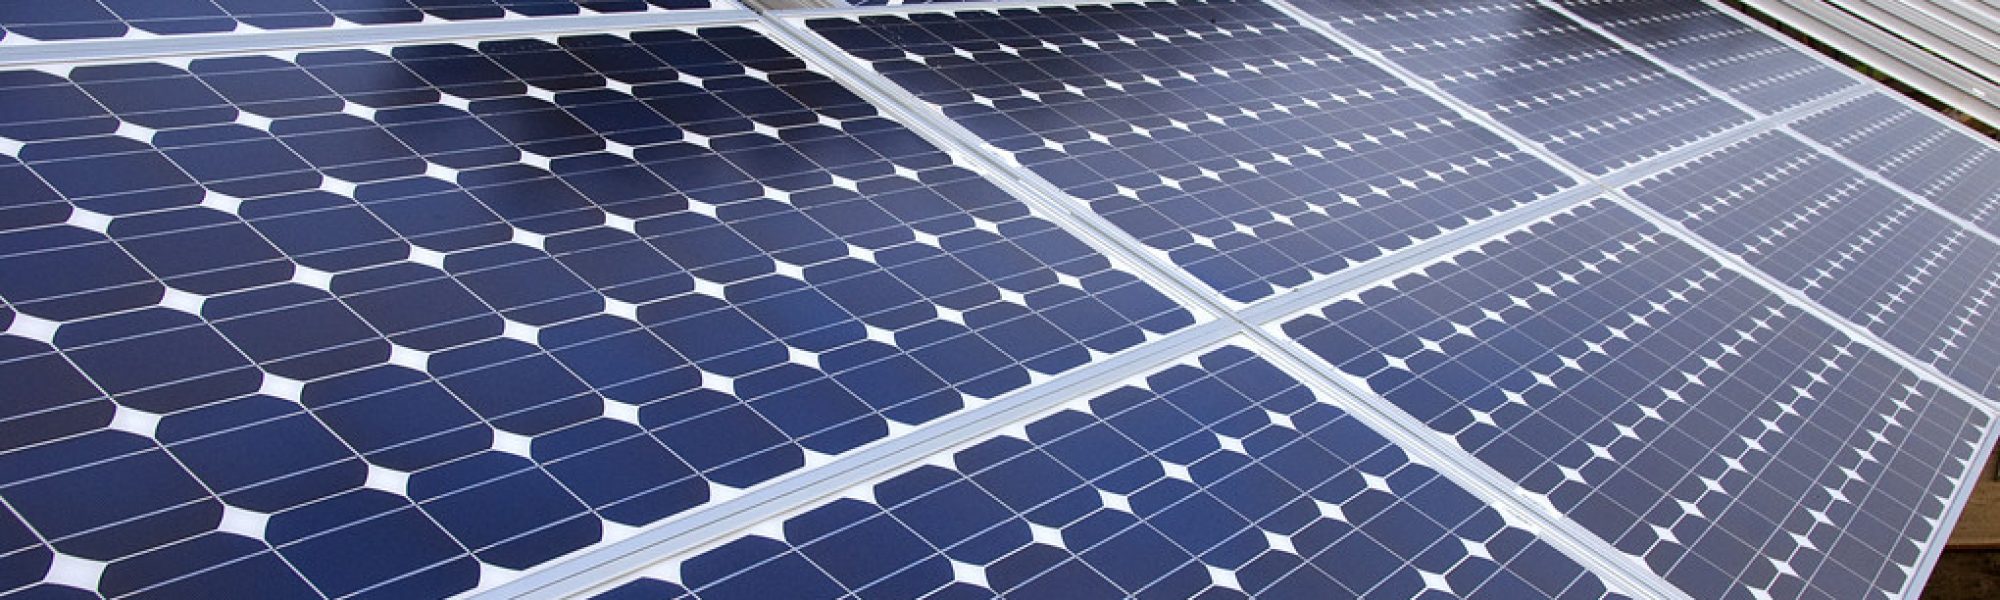 USC signs solar energy deal with LADWP